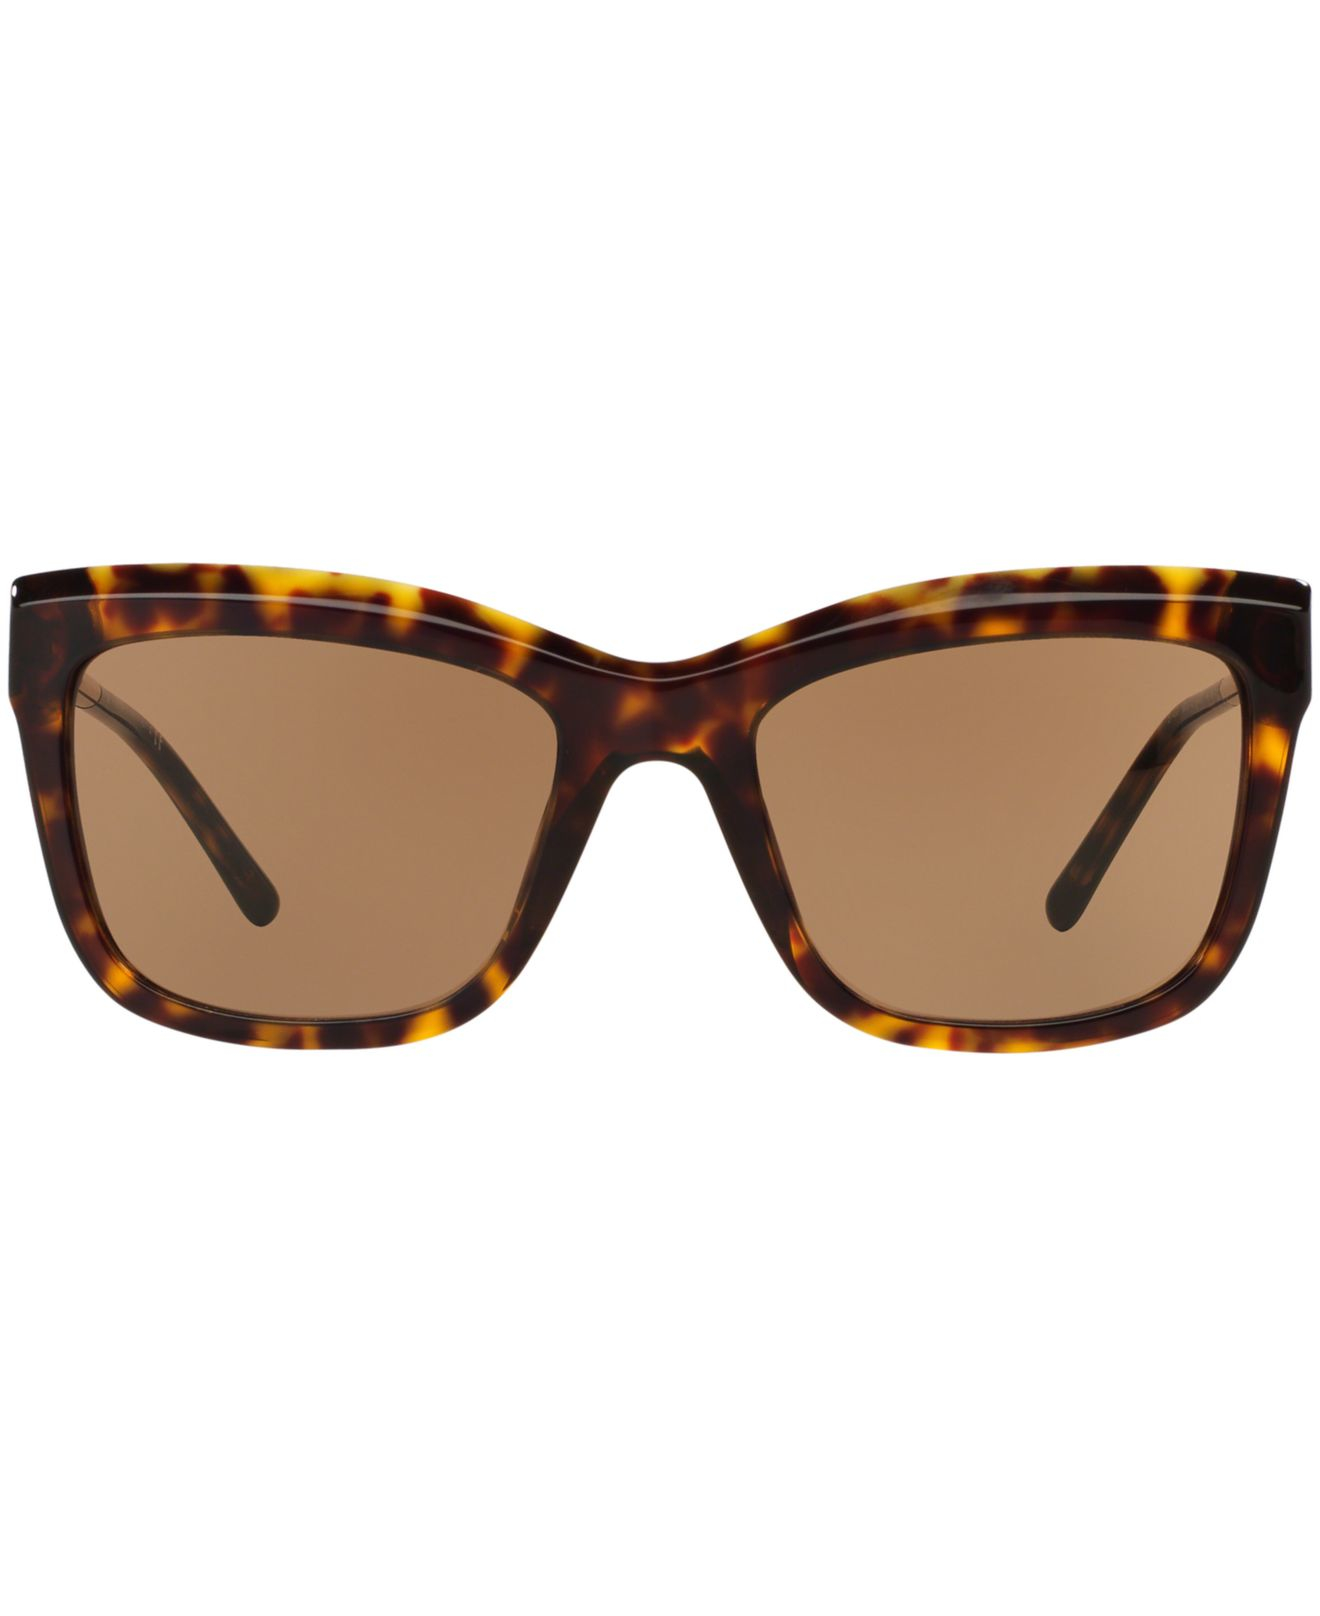 Burberry Sunglasses, Be4207 in Tortoise/Brown (Brown) - Lyst